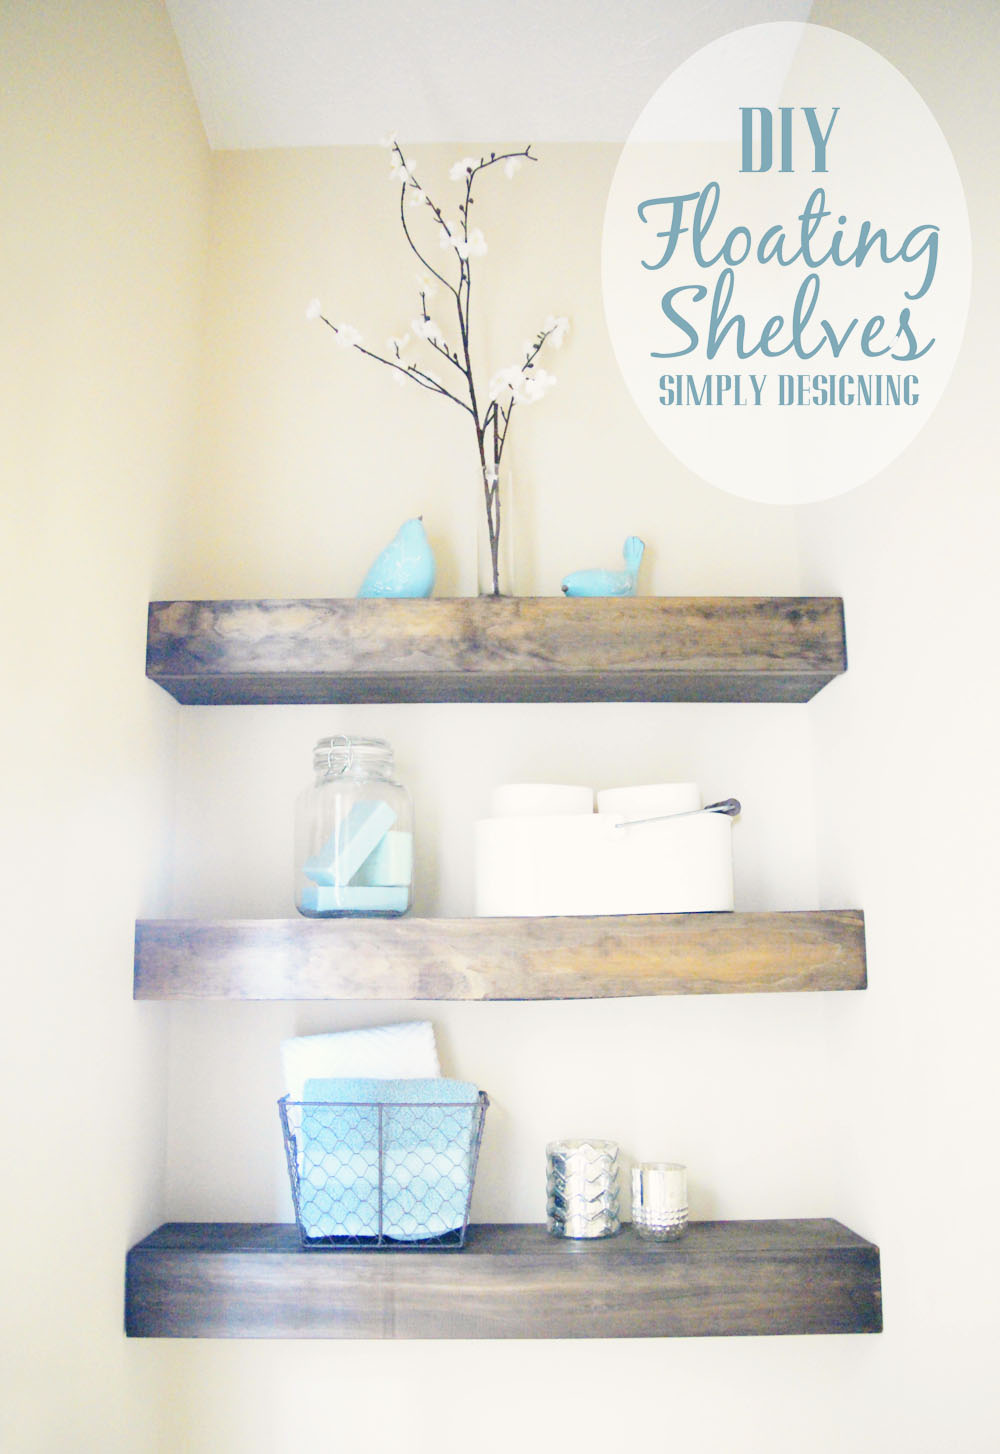 DIY Floating Shelves- How to Measure, Cut, and Install